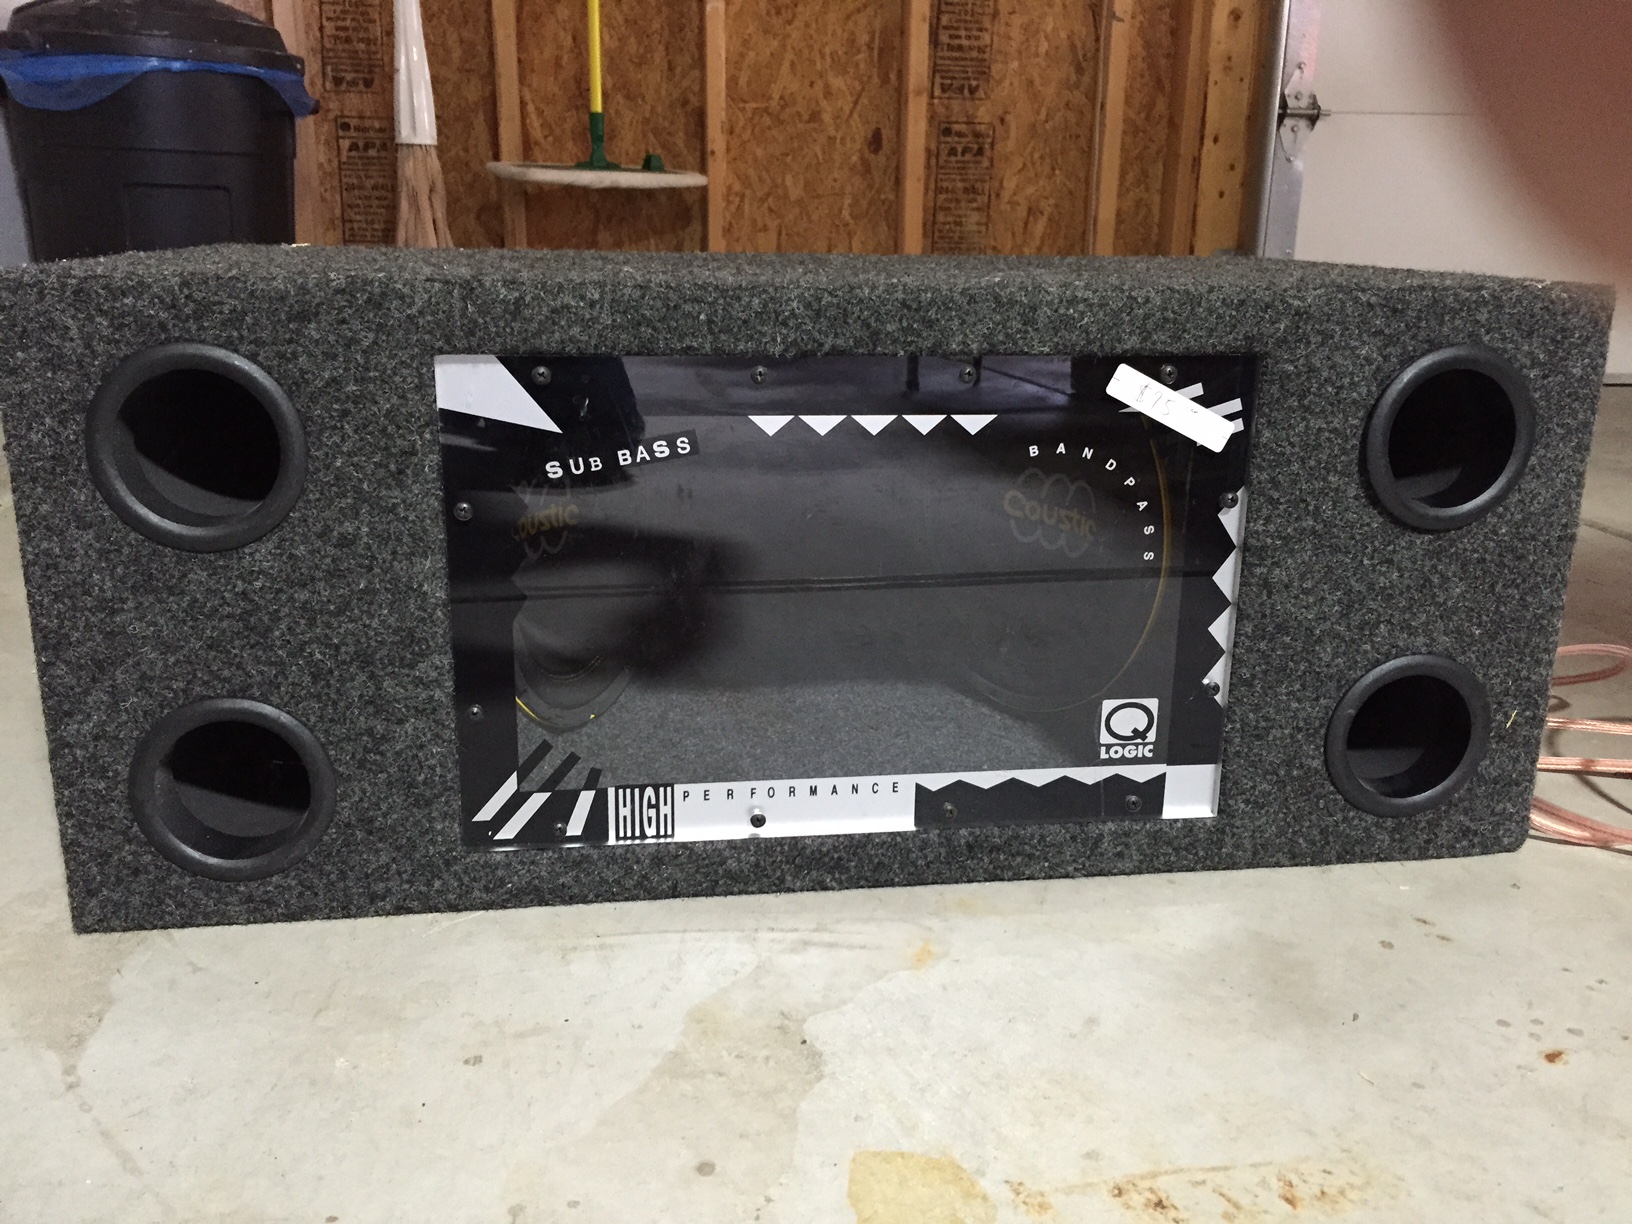 Bandpass Box and Subwoofers